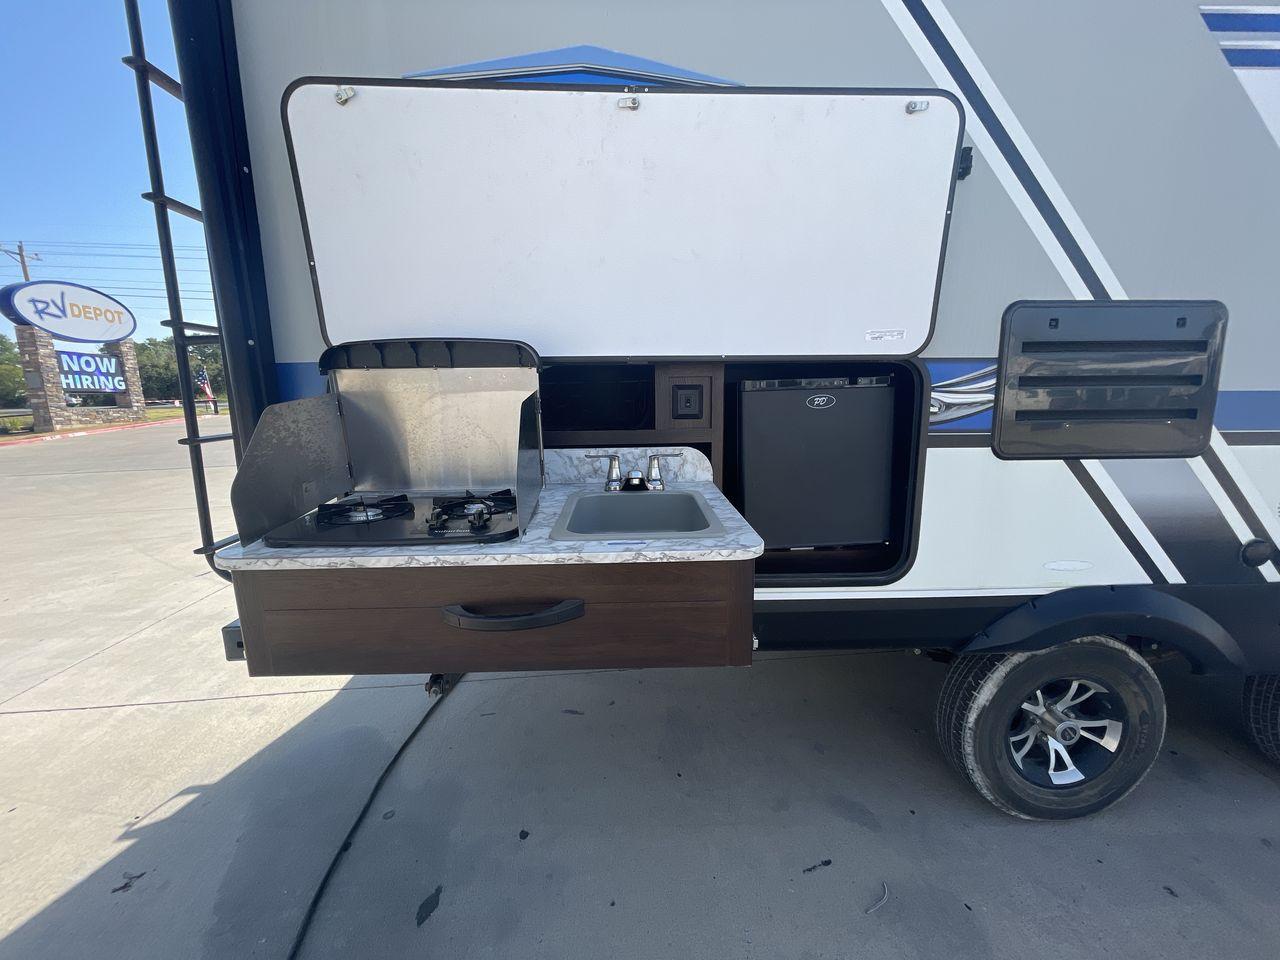 2018 WHITE JAYCO JAY FLIGHT 23MRB (1UJBJ0BN5J1) , Length: 28.17 ft | Dry Weight: 5,560 lbs. | Gross Weight: 7,250 lbs. | Slides: 1 transmission, located at 4319 N Main St, Cleburne, TX, 76033, (817) 678-5133, 32.385960, -97.391212 - The 2018 Jayco Jay Flight 23MRB is a travel trailer that encapsulates both compactness and luxury for unparalleled camping experiences. Spanning 28 feet in length, this model boasts a thoughtfully arranged interior featuring a single slide-out, seamlessly amplifying the living space. The Jay Flight - Photo #20